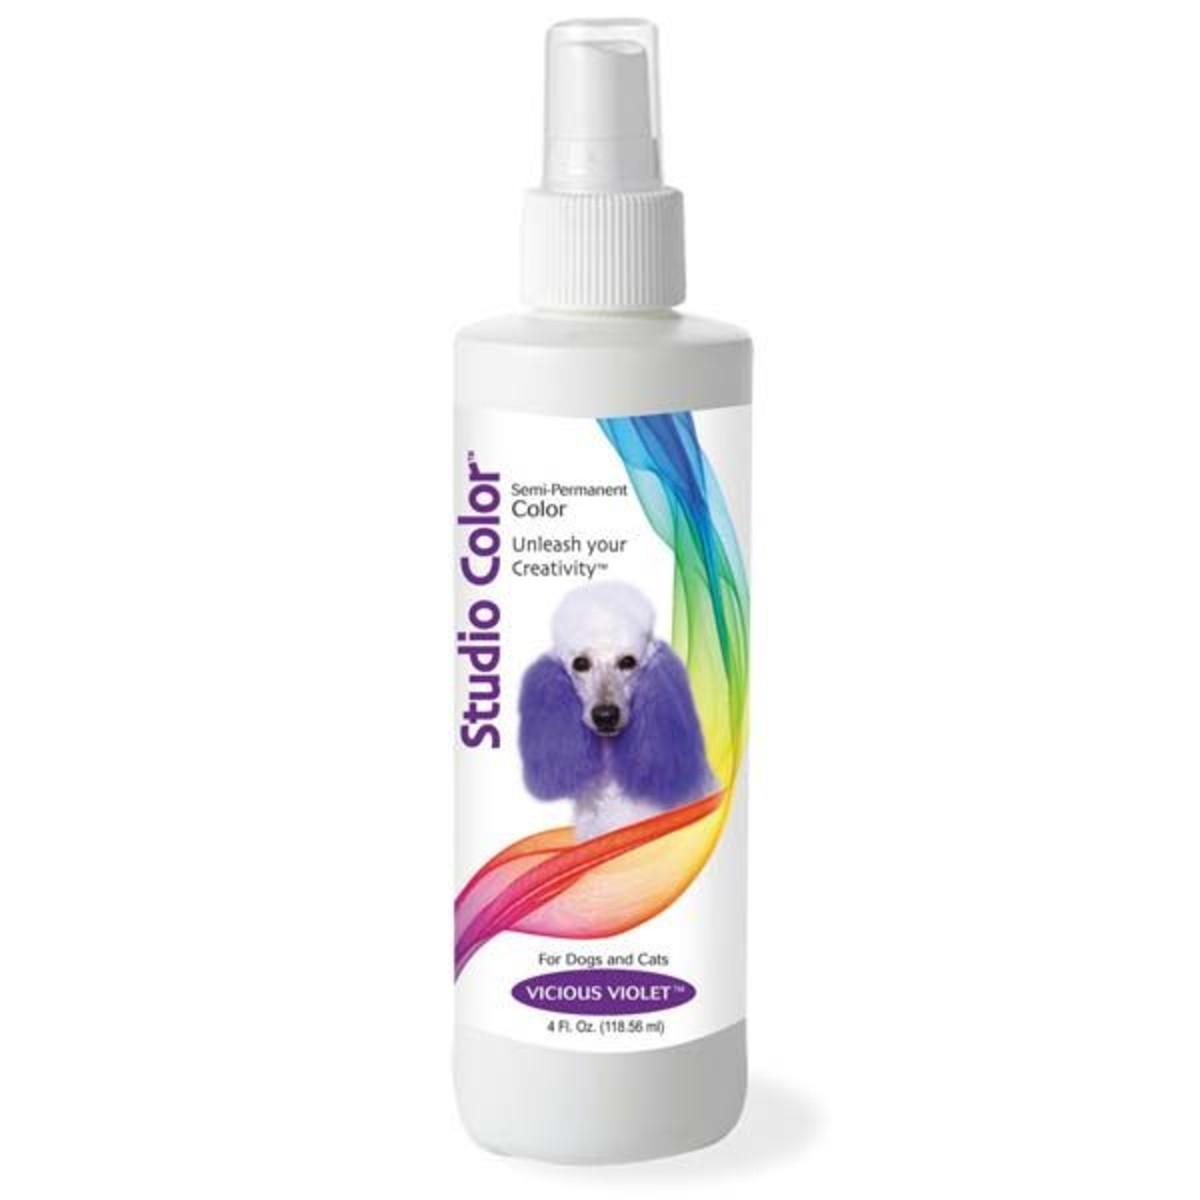 Davis Studio Color Hair Dyes for Dogs and Cats - Vicious Violet